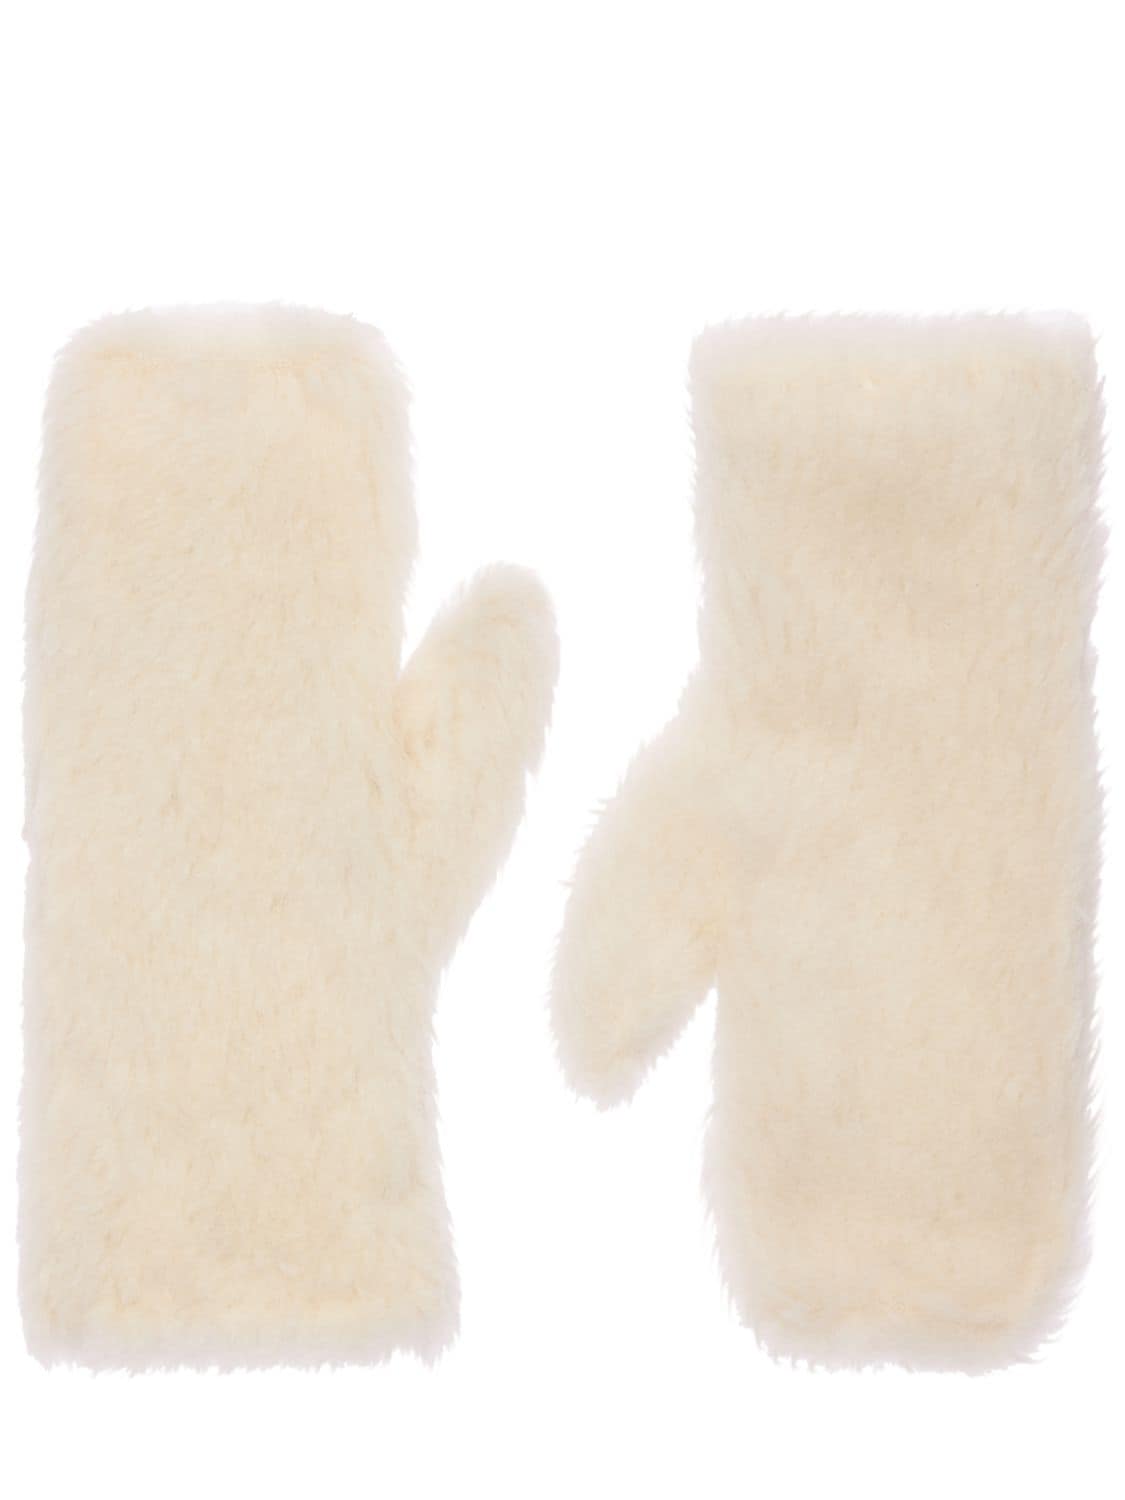 Max Mara Ombrato Wool Blend Teddy Gloves W/ Strap In White